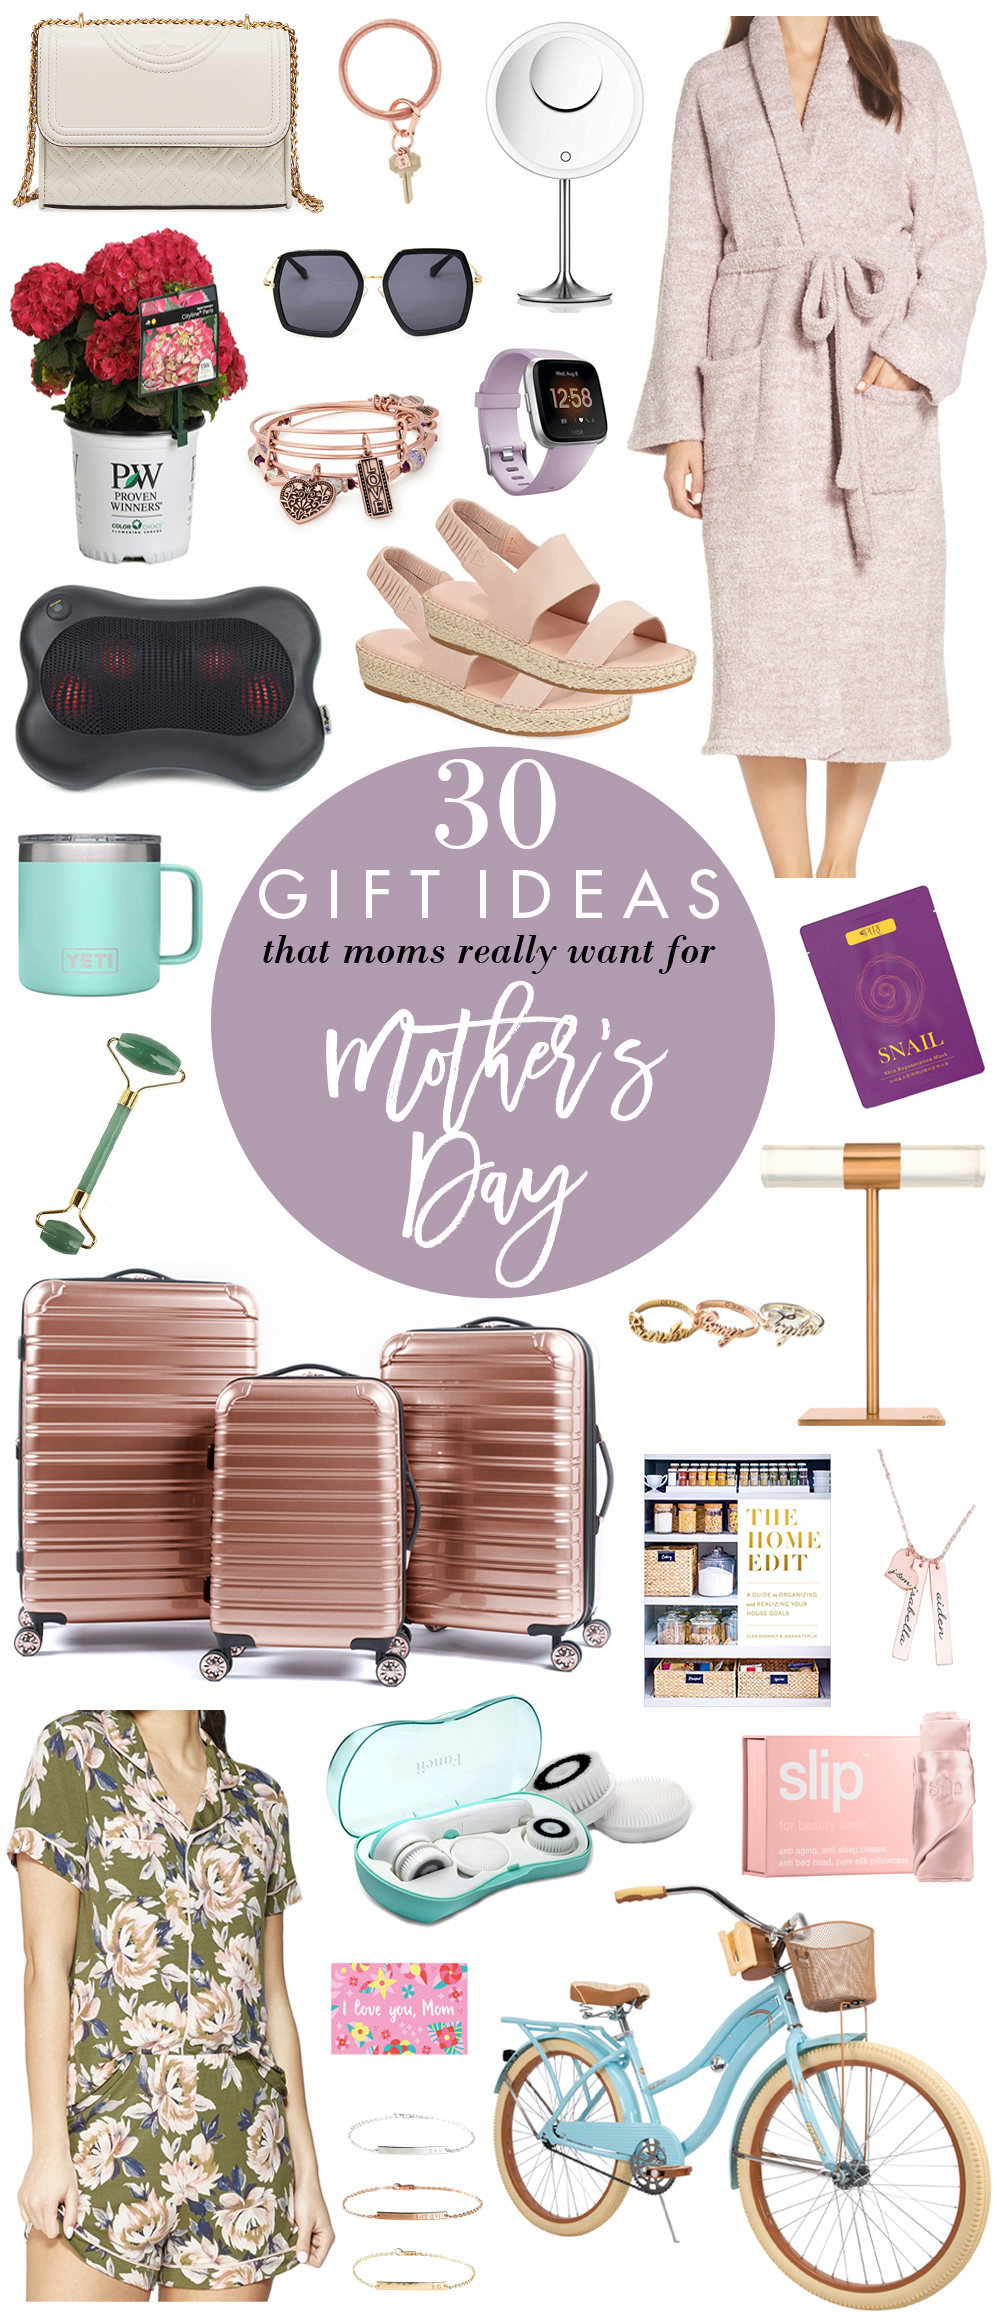 https://www.sandyalamode.com/wp-content/uploads/2019/05/30-Gift-Ideas-Moms-Really-Want-For-Mothers-Day.jpg